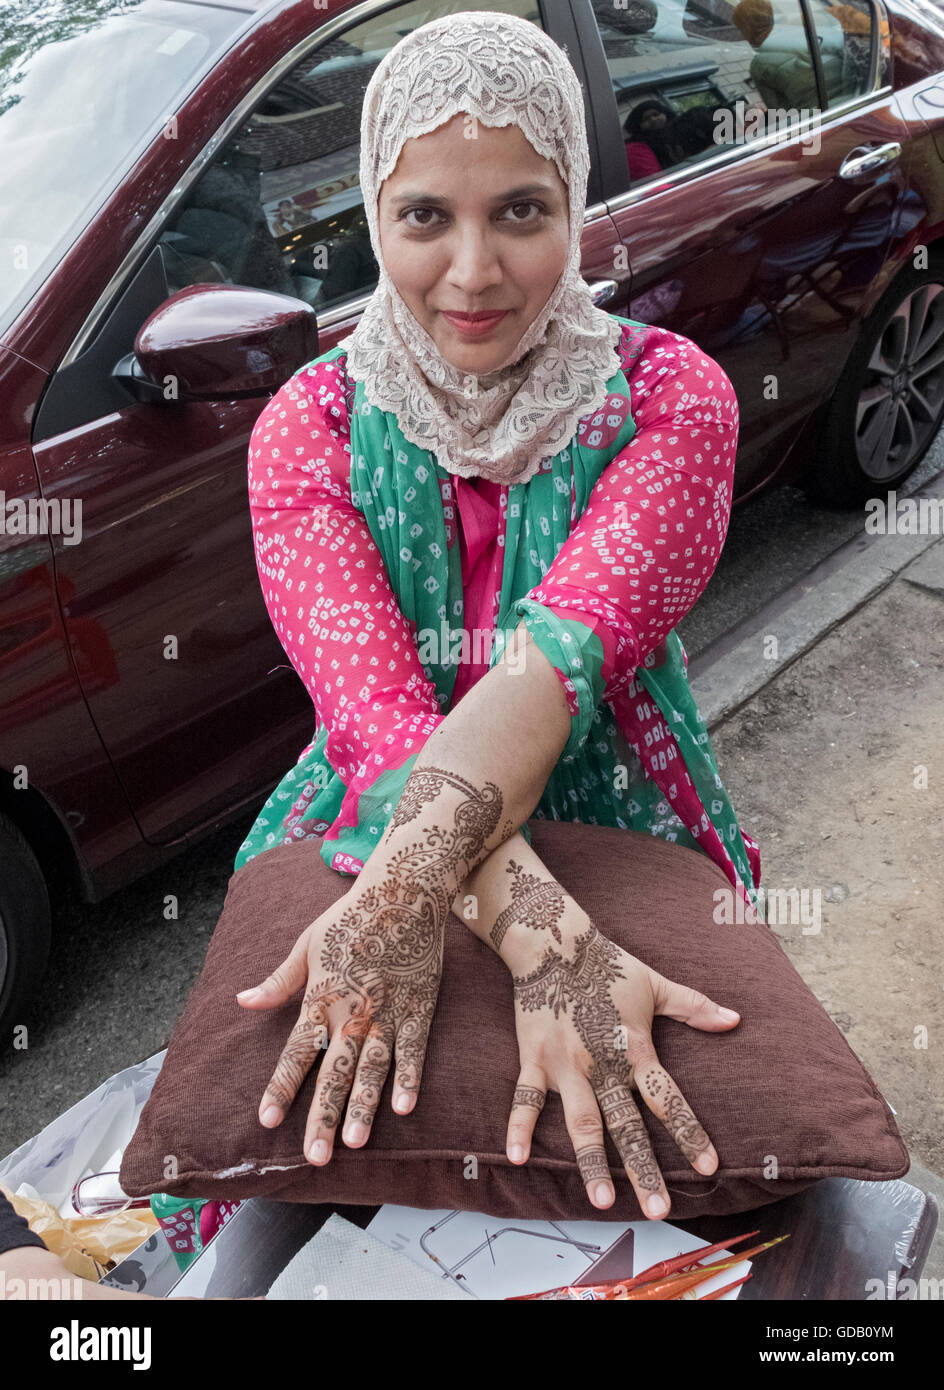 A woman from Bangladesh shows her henna decorations for the Eid al Fitr festival. In Jackson Heights, Queens, New York. Stock Photo